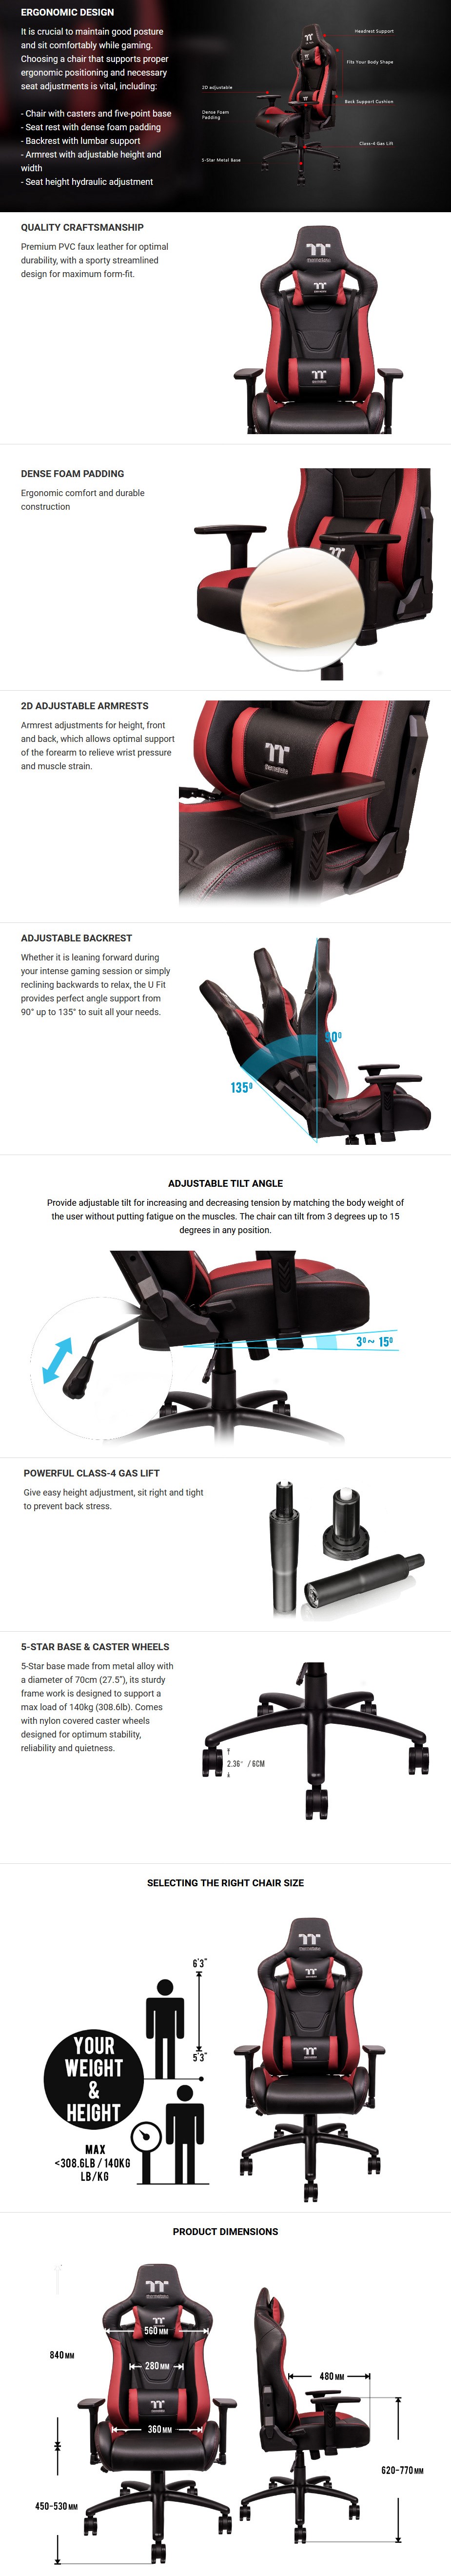 Thermaltake Gaming U Fit Office/Gaming Chair - Black/Red - Overview 1